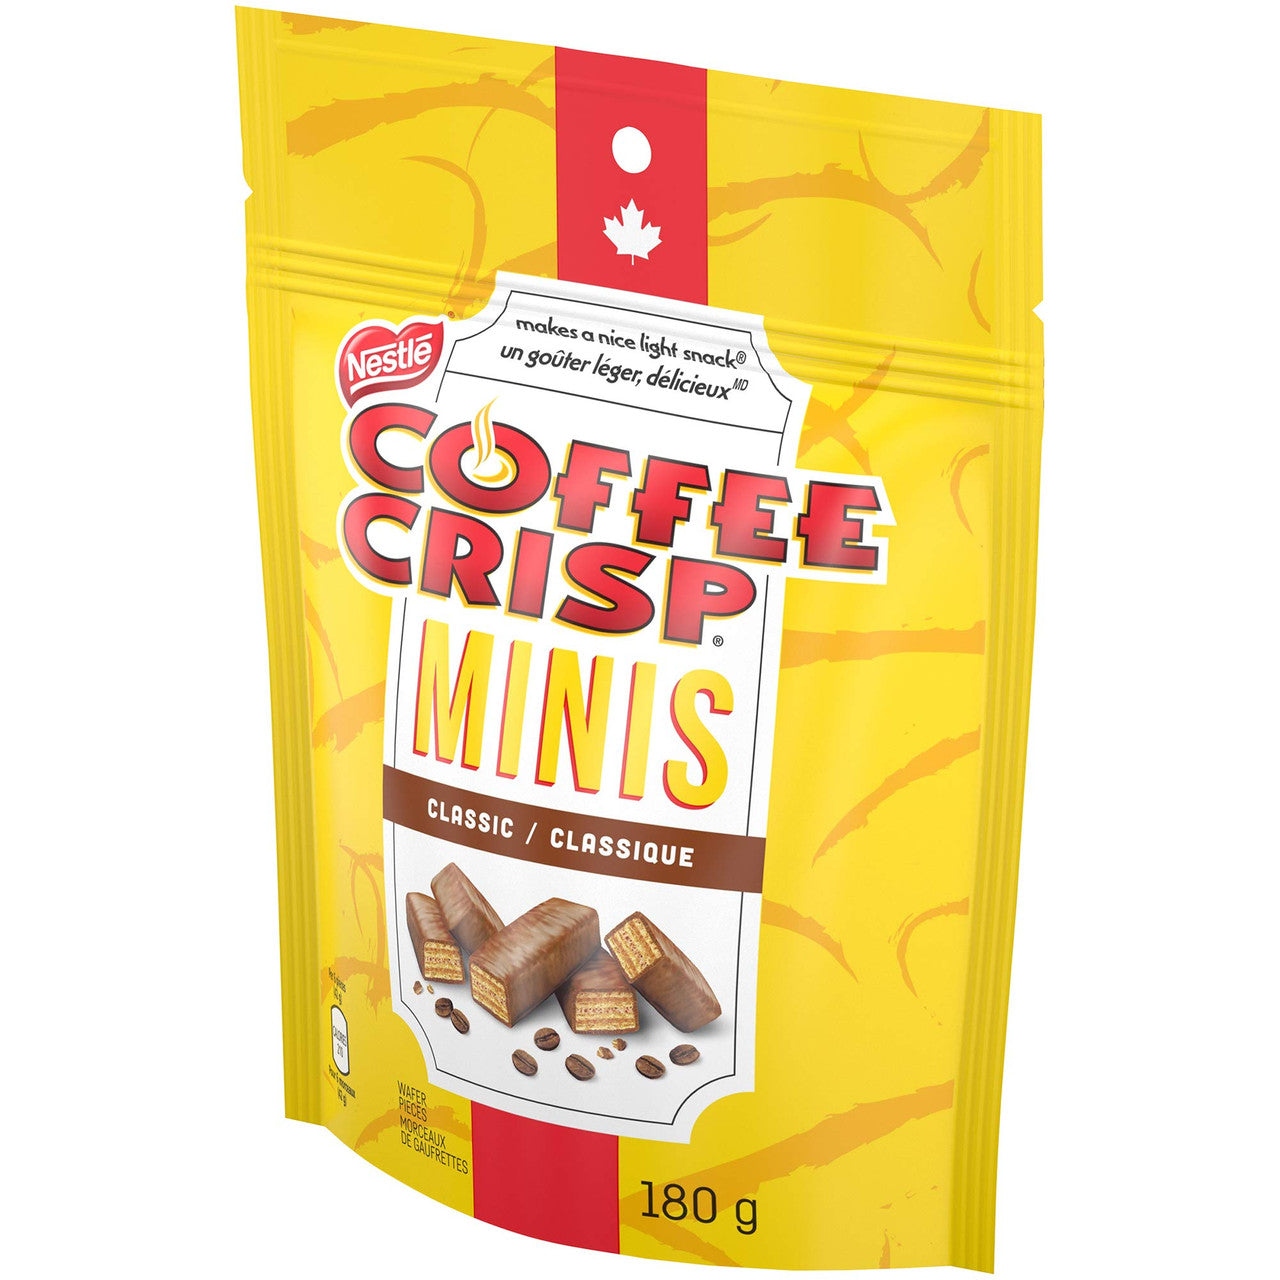 COFFEE CRISP NESTLE Minis, 180g/6.3 oz. Bag {Imported from Canada}